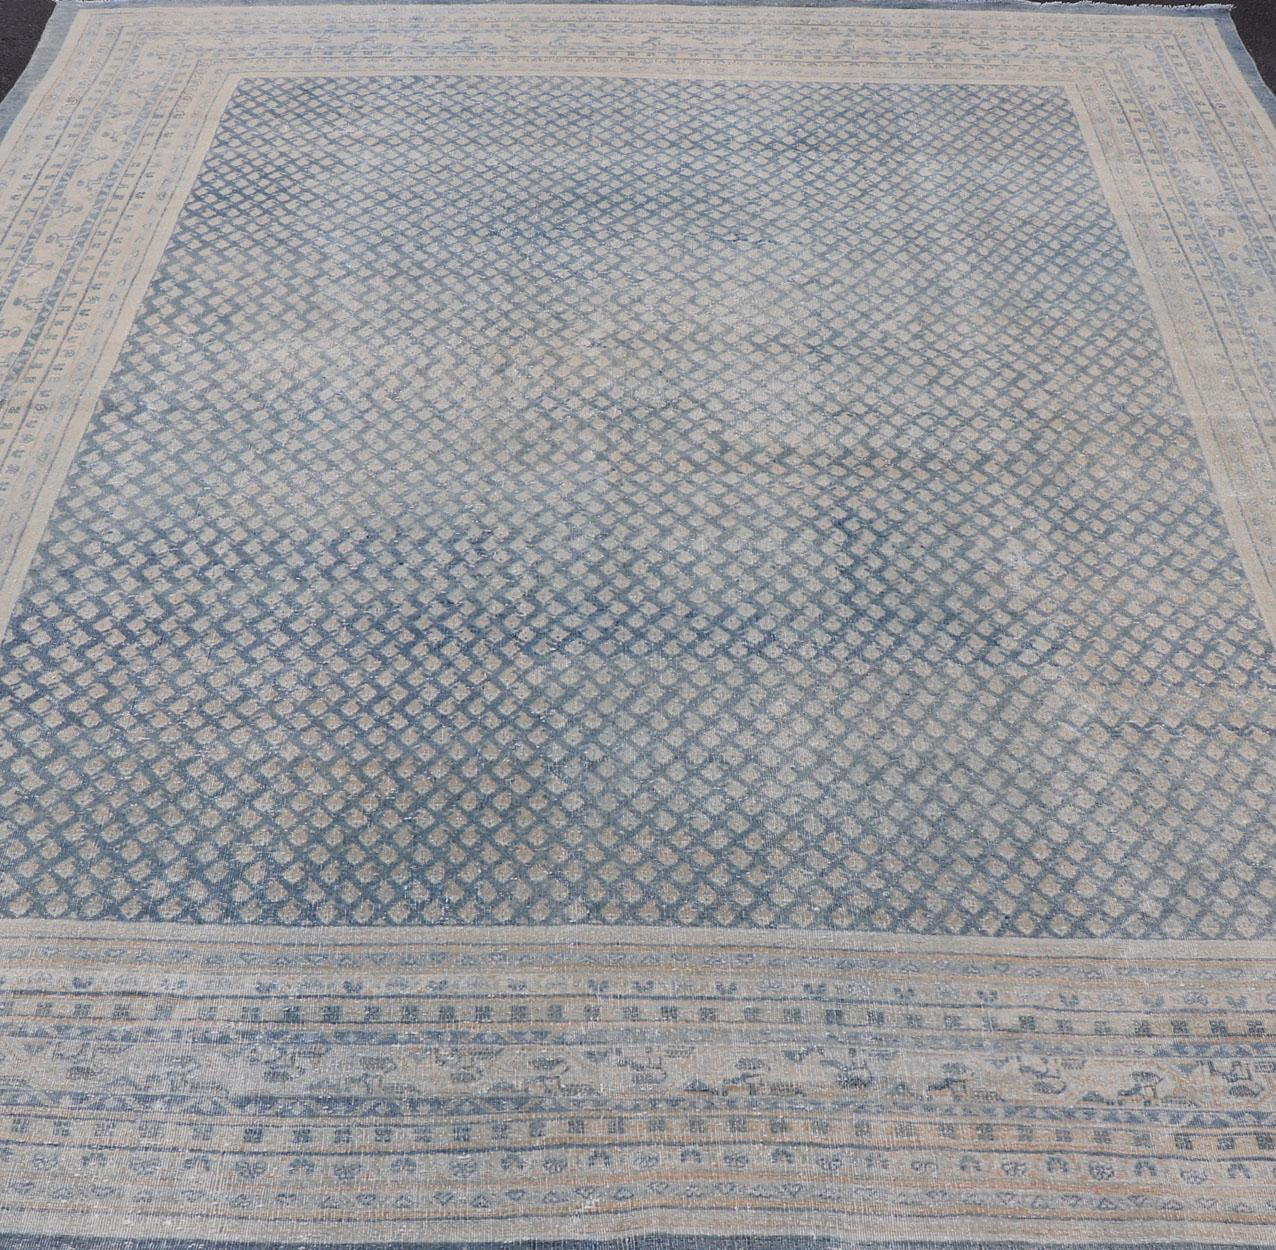 Minimalist Design Antique Persian Tabriz Rug with Modern Look in Blue Tones For Sale 8